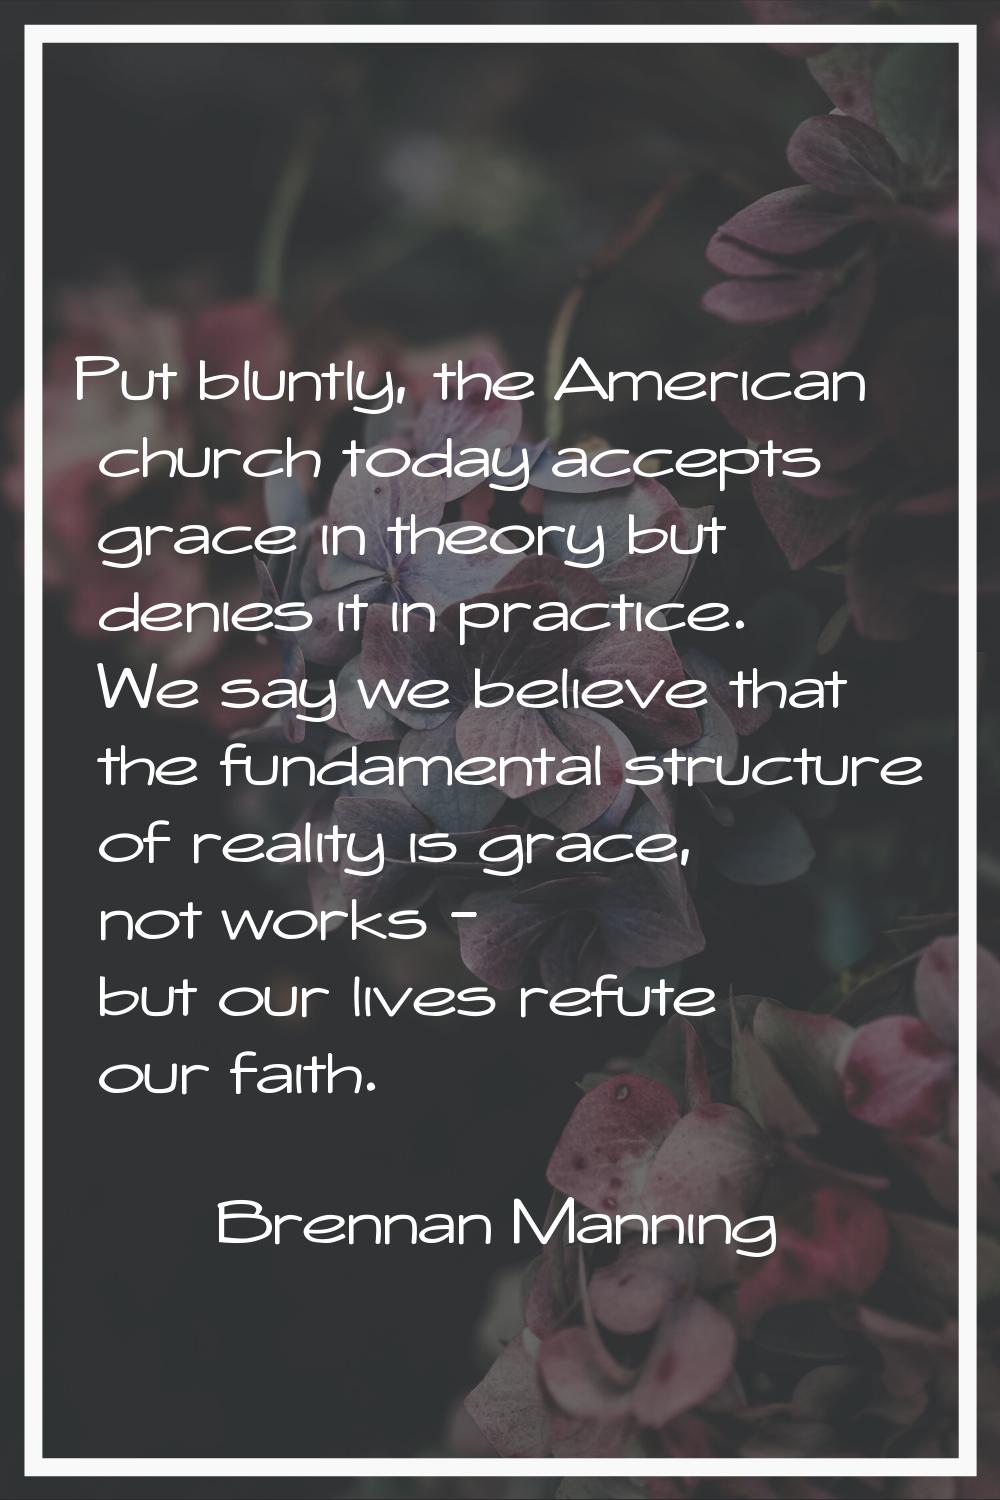 Put bluntly, the American church today accepts grace in theory but denies it in practice. We say we